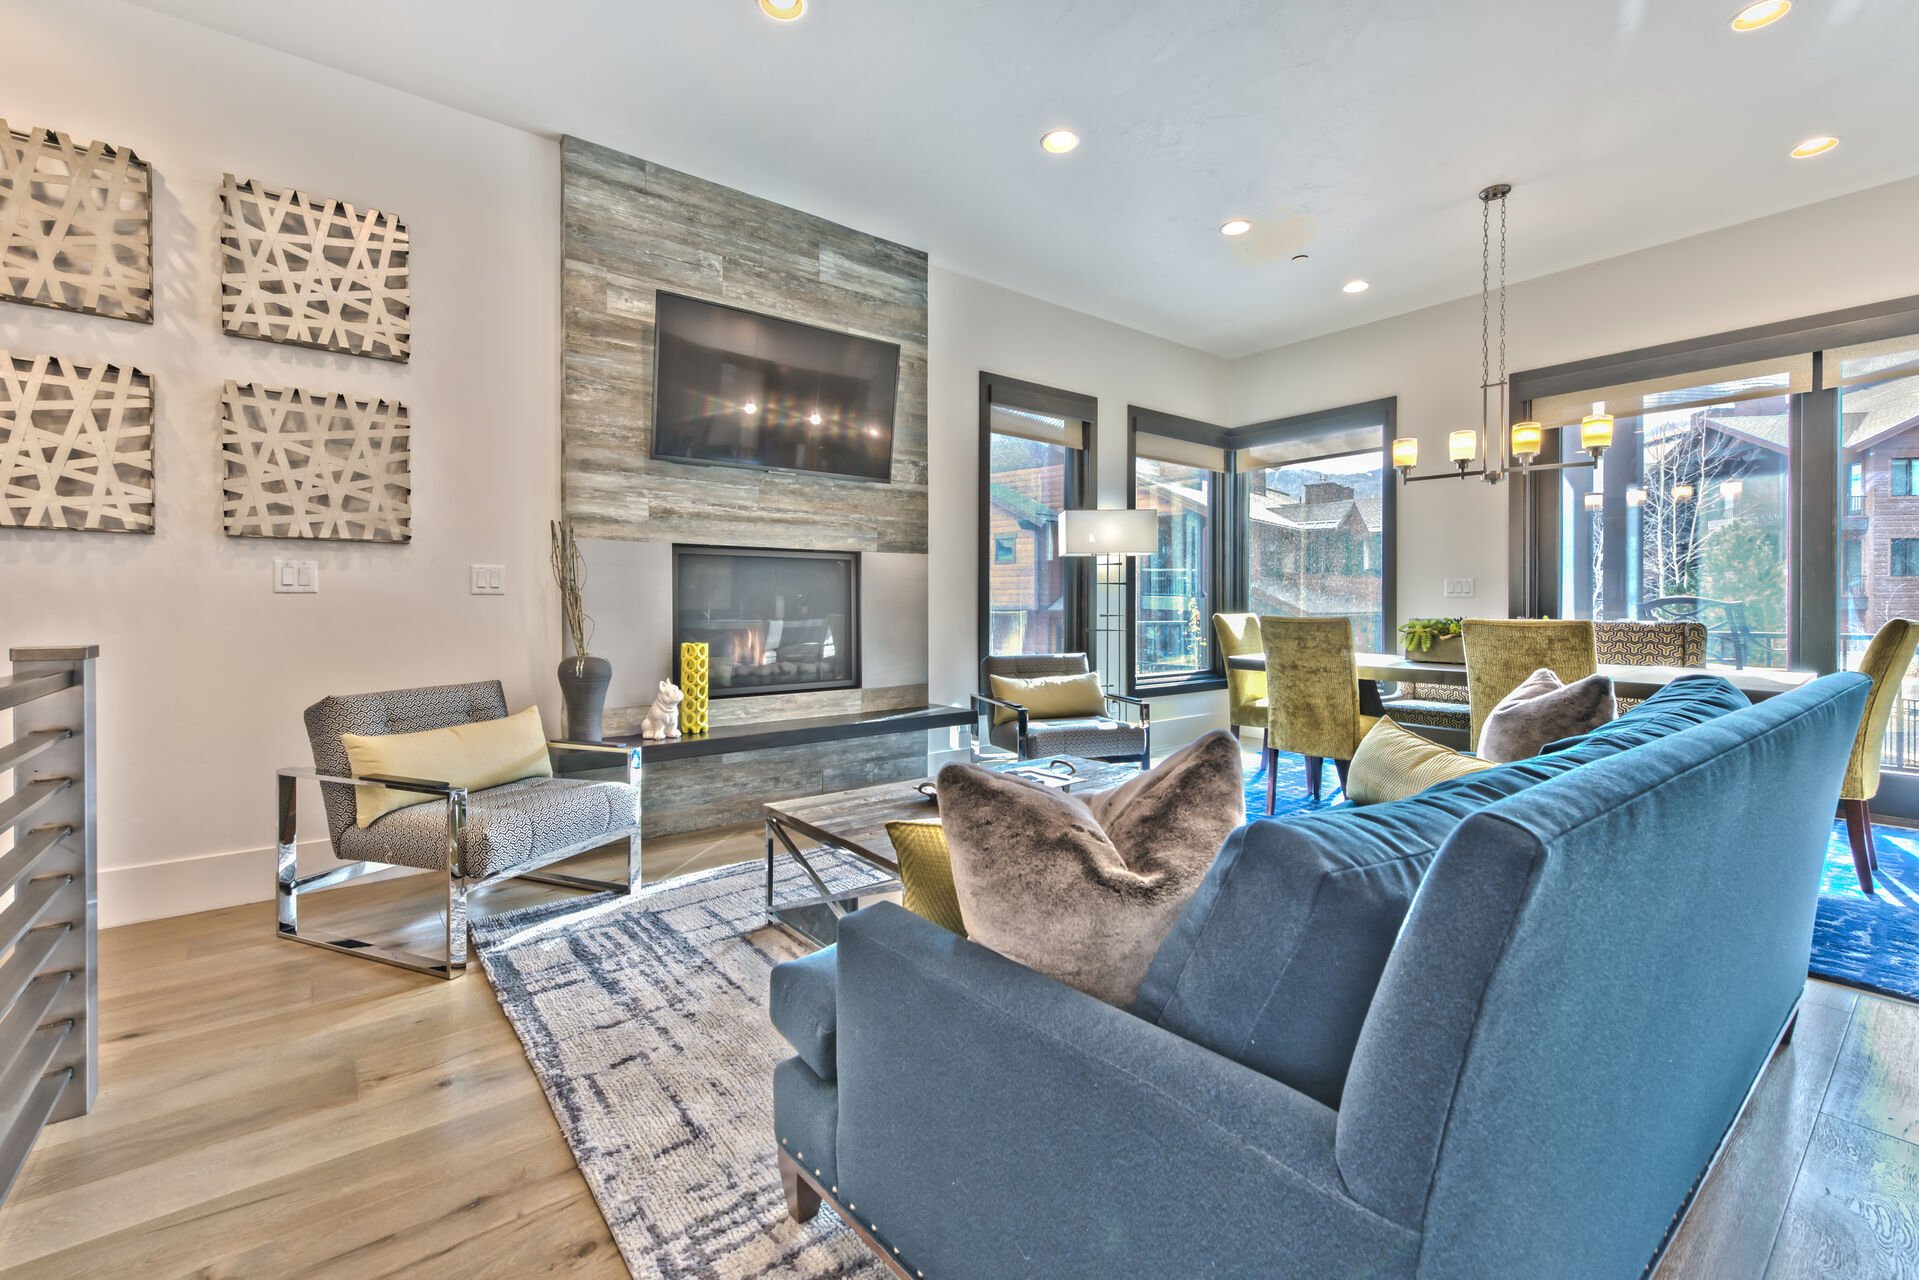 Mountain Contemporary Furnishings Surround a Warm Gas Fireplace and Large Flat Screen TV